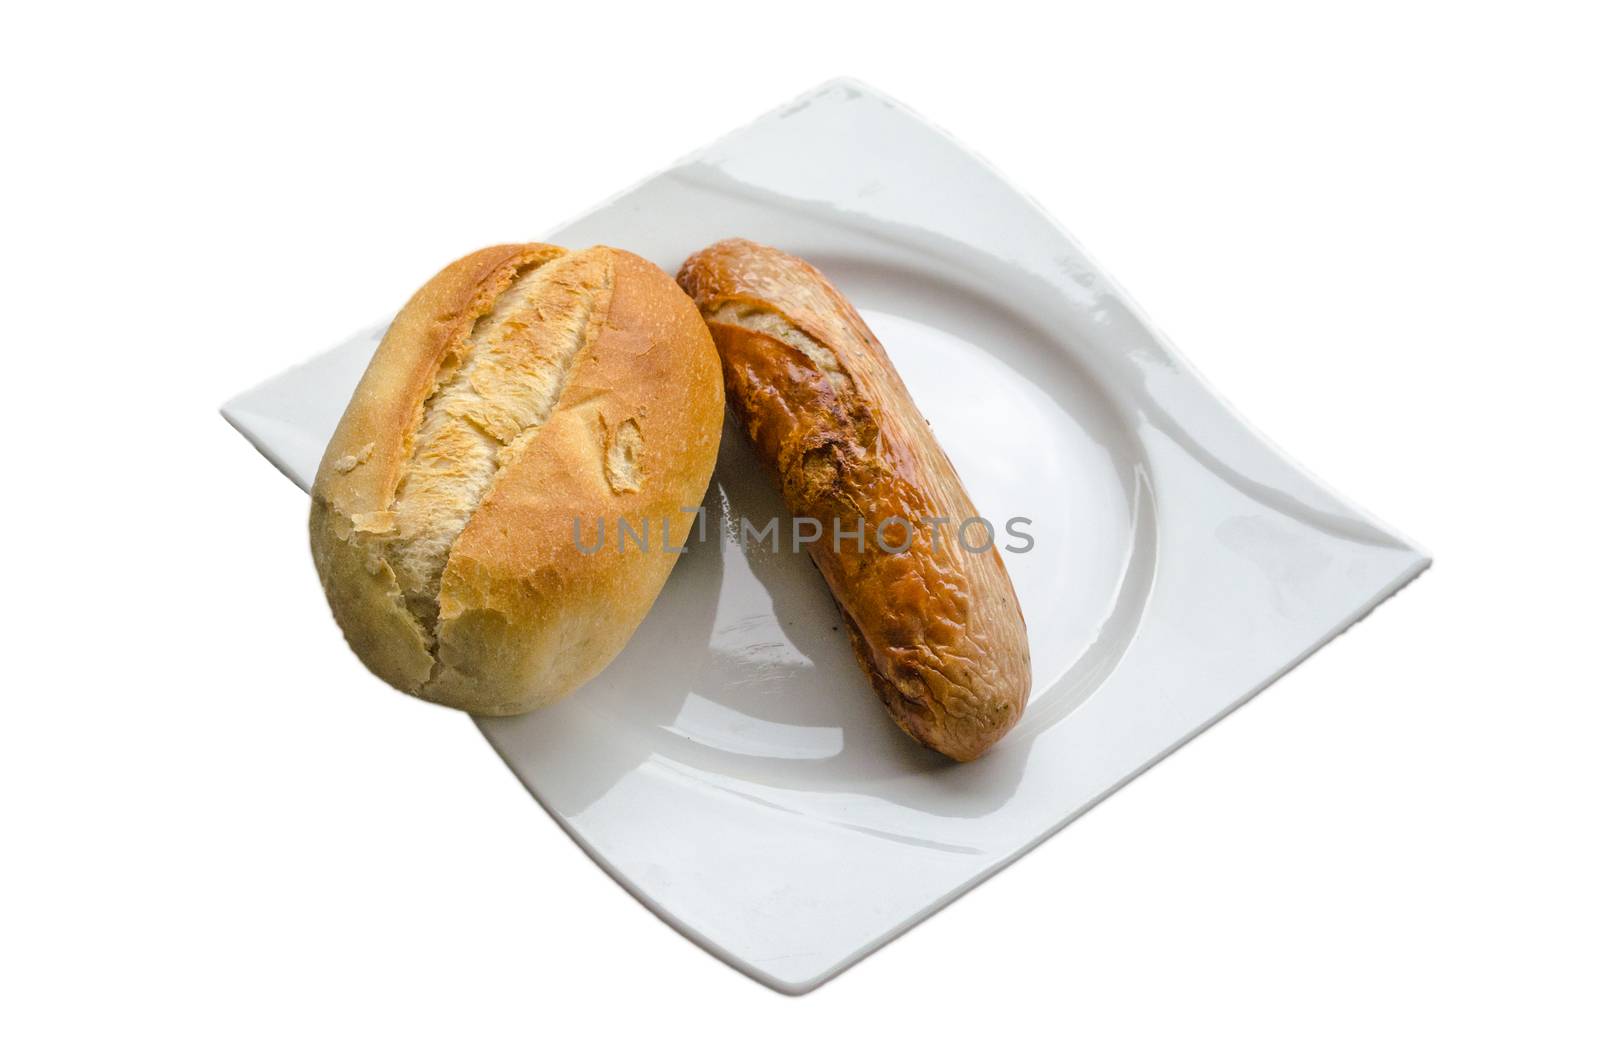 Bratwurste, BBQ sausage, sausage isolated on light plate with rolls on a light background